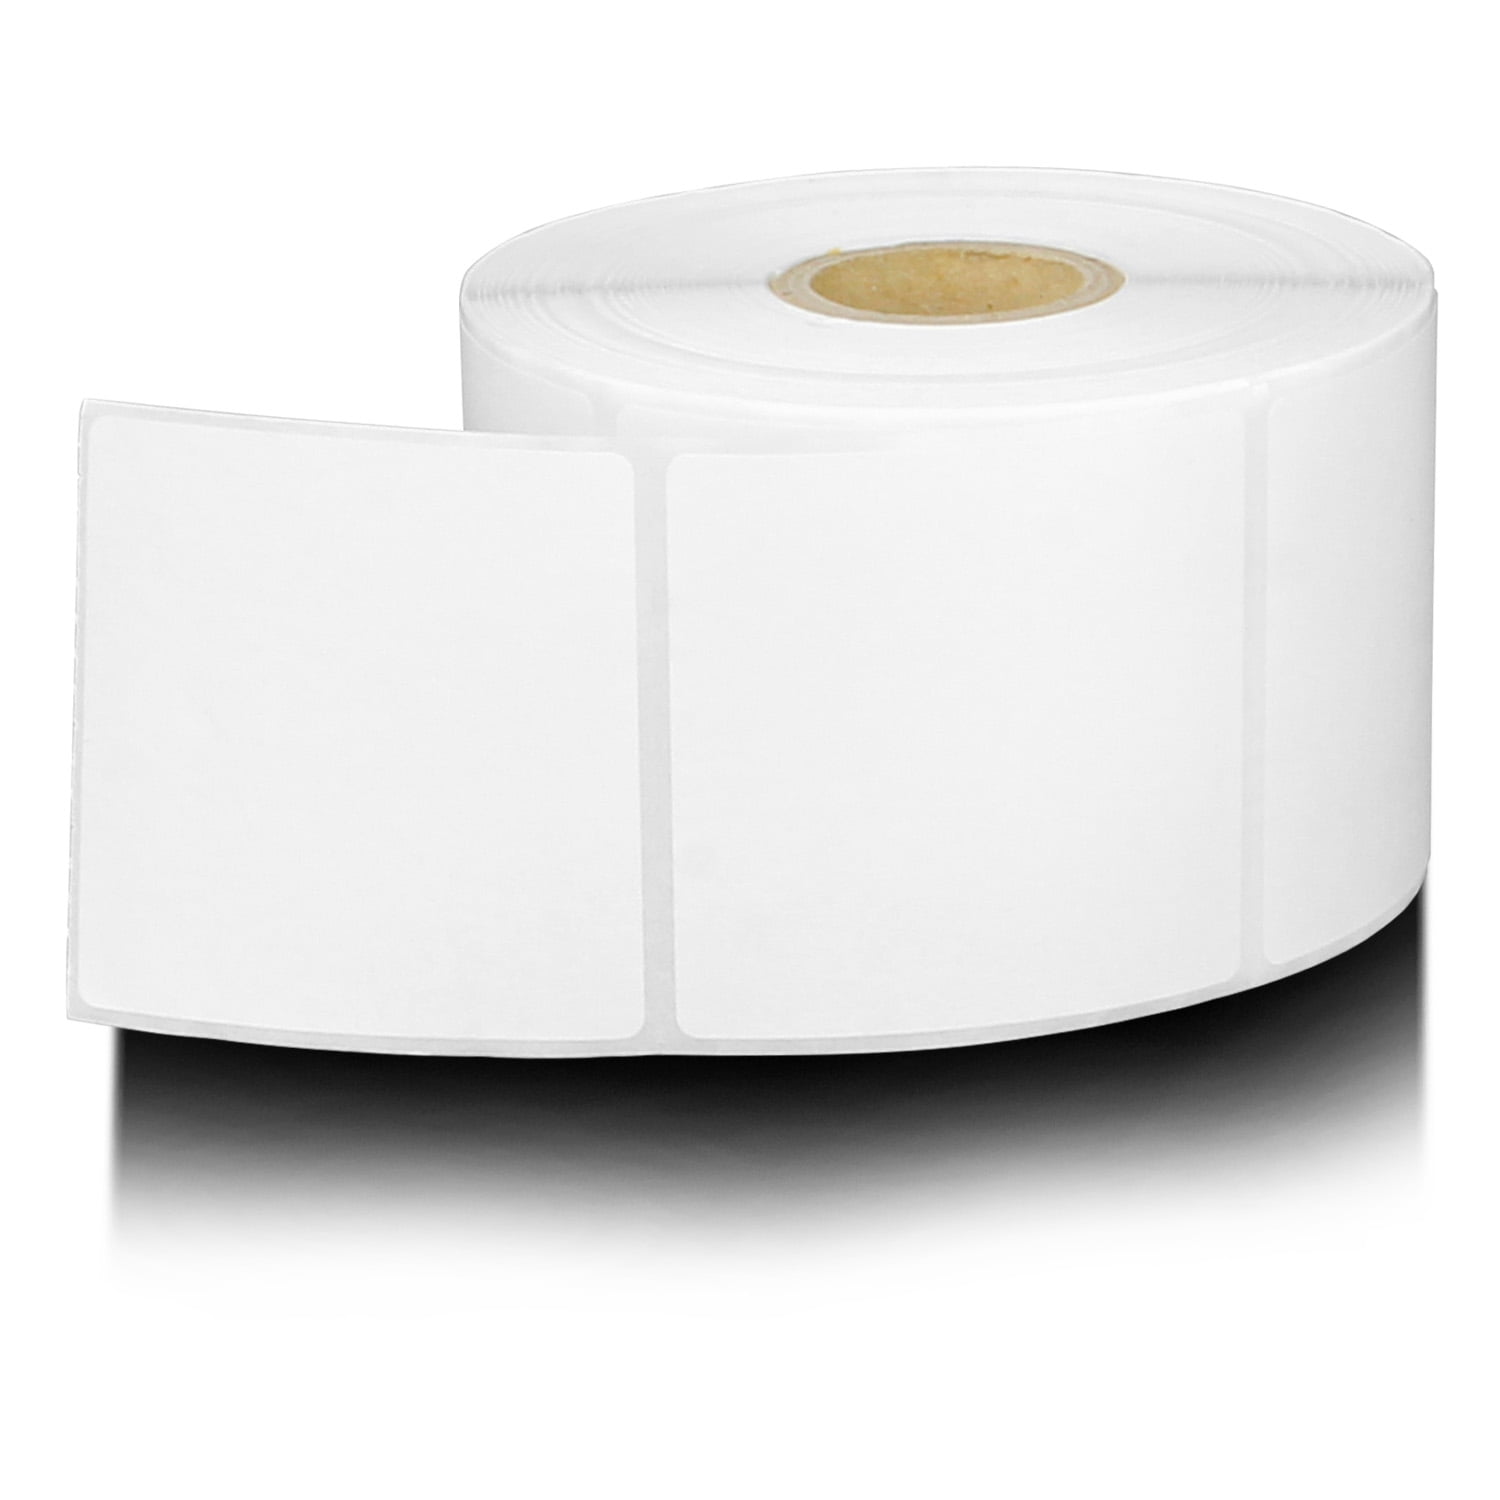 100mm x 50mm White Direct Thermal Label for Zebra Printer 1000 Labels Per Roll 